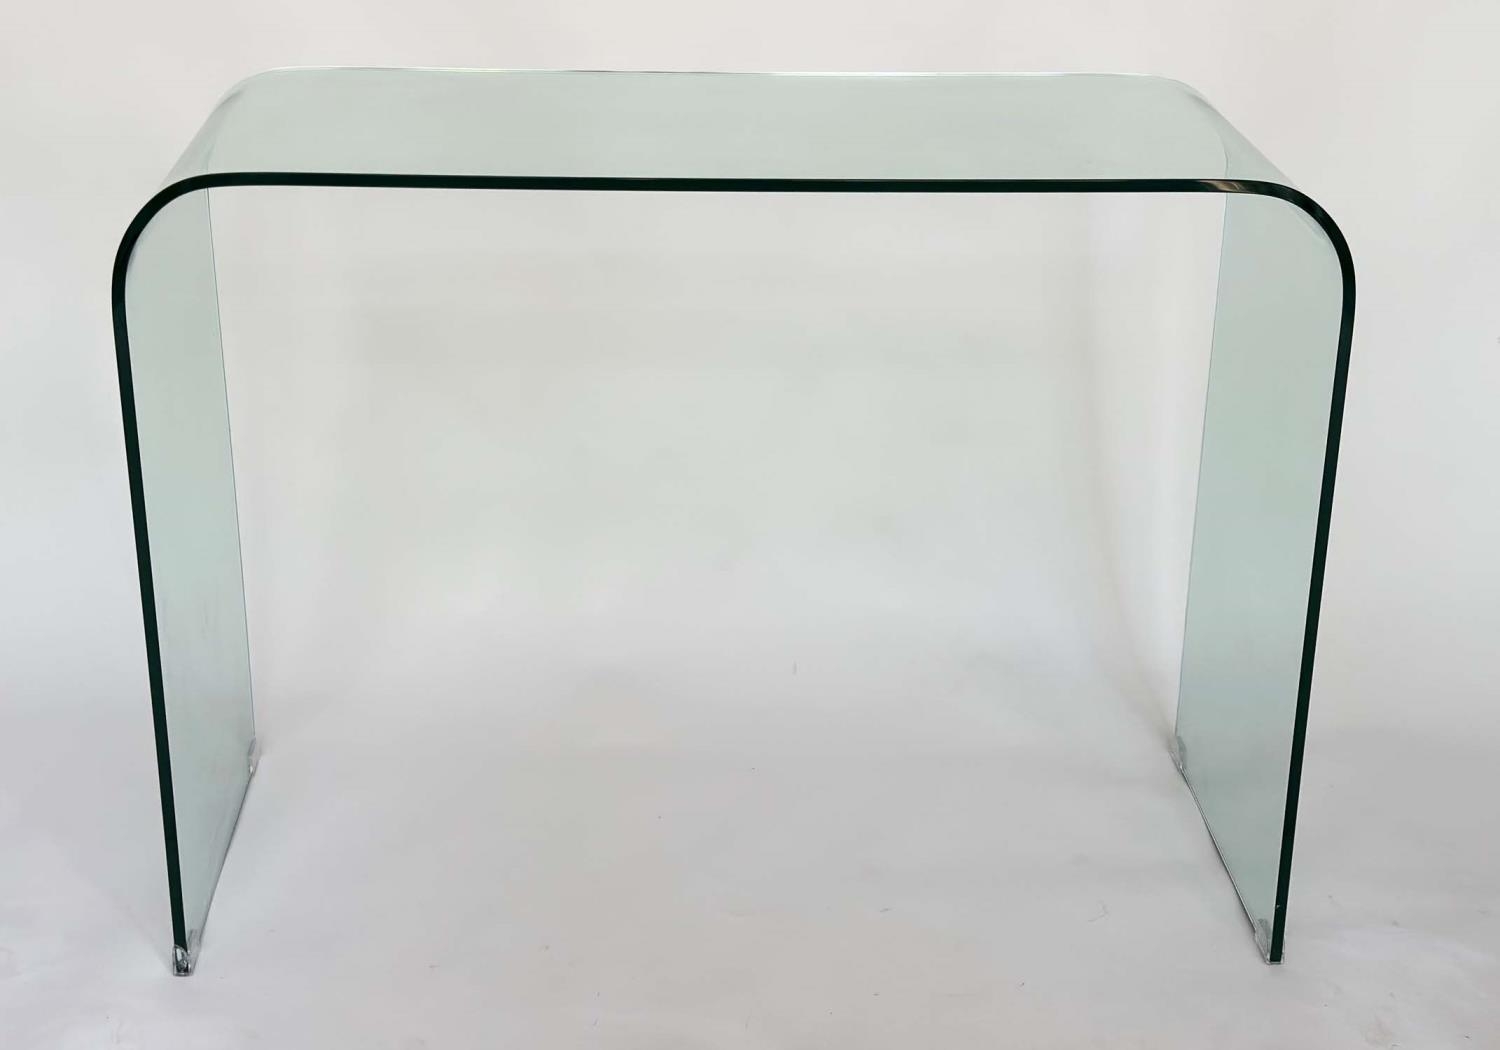 CONSOLE TABLE, curved arched glass, 110cm W x 80cm H x 40cm D.